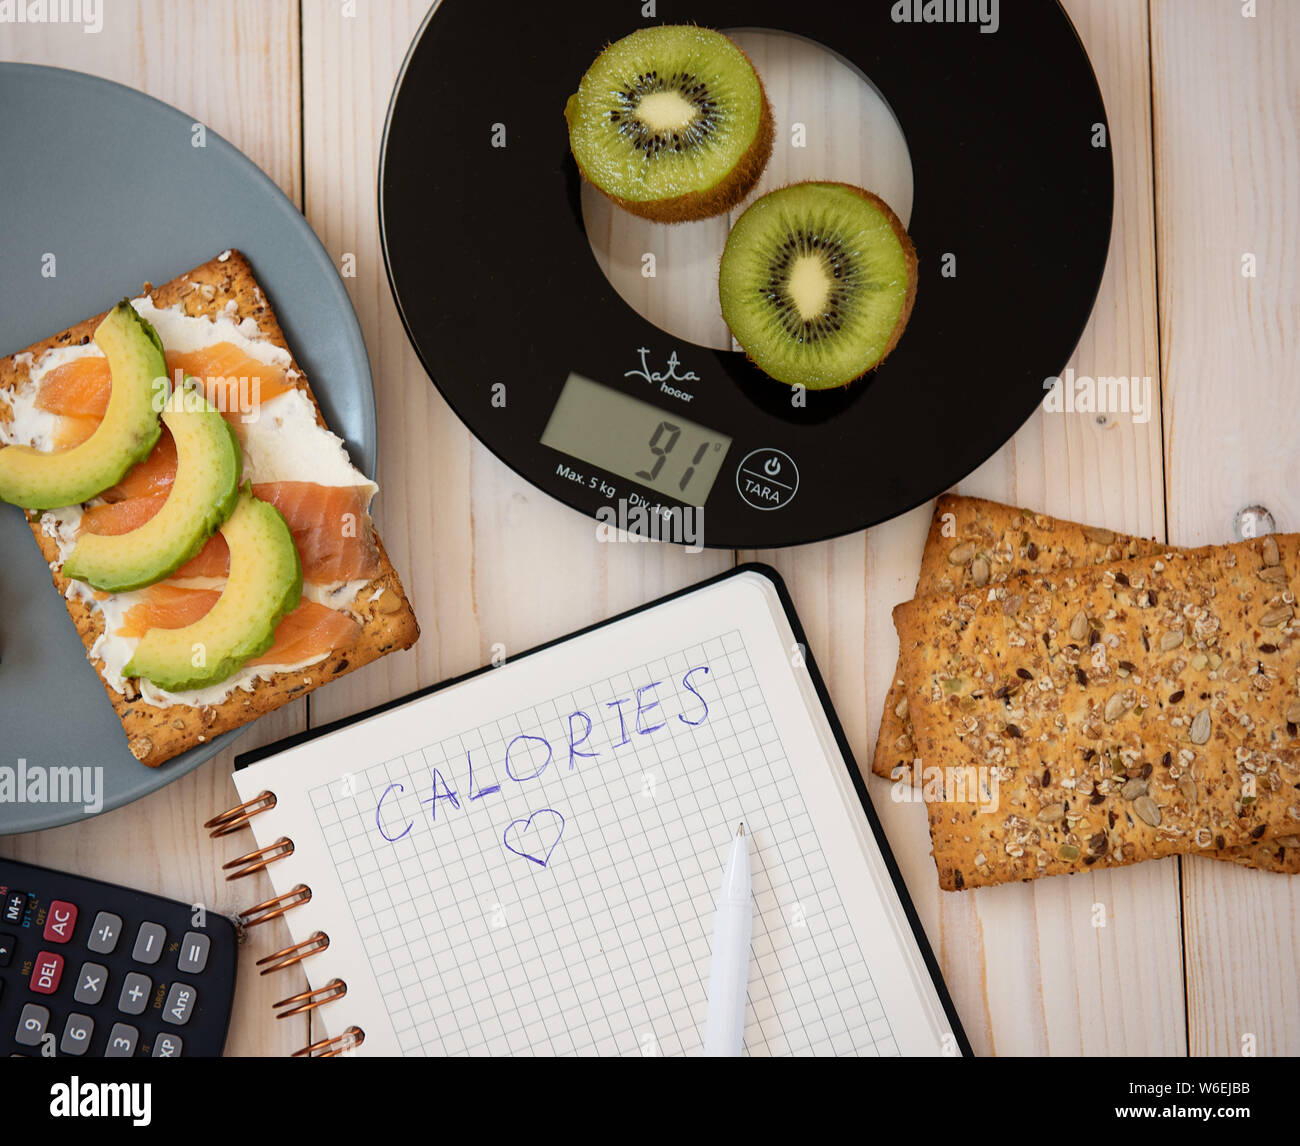 https://c8.alamy.com/comp/W6EJBB/healthy-lifestyle-calorie-counting-scales-and-calculator-W6EJBB.jpg